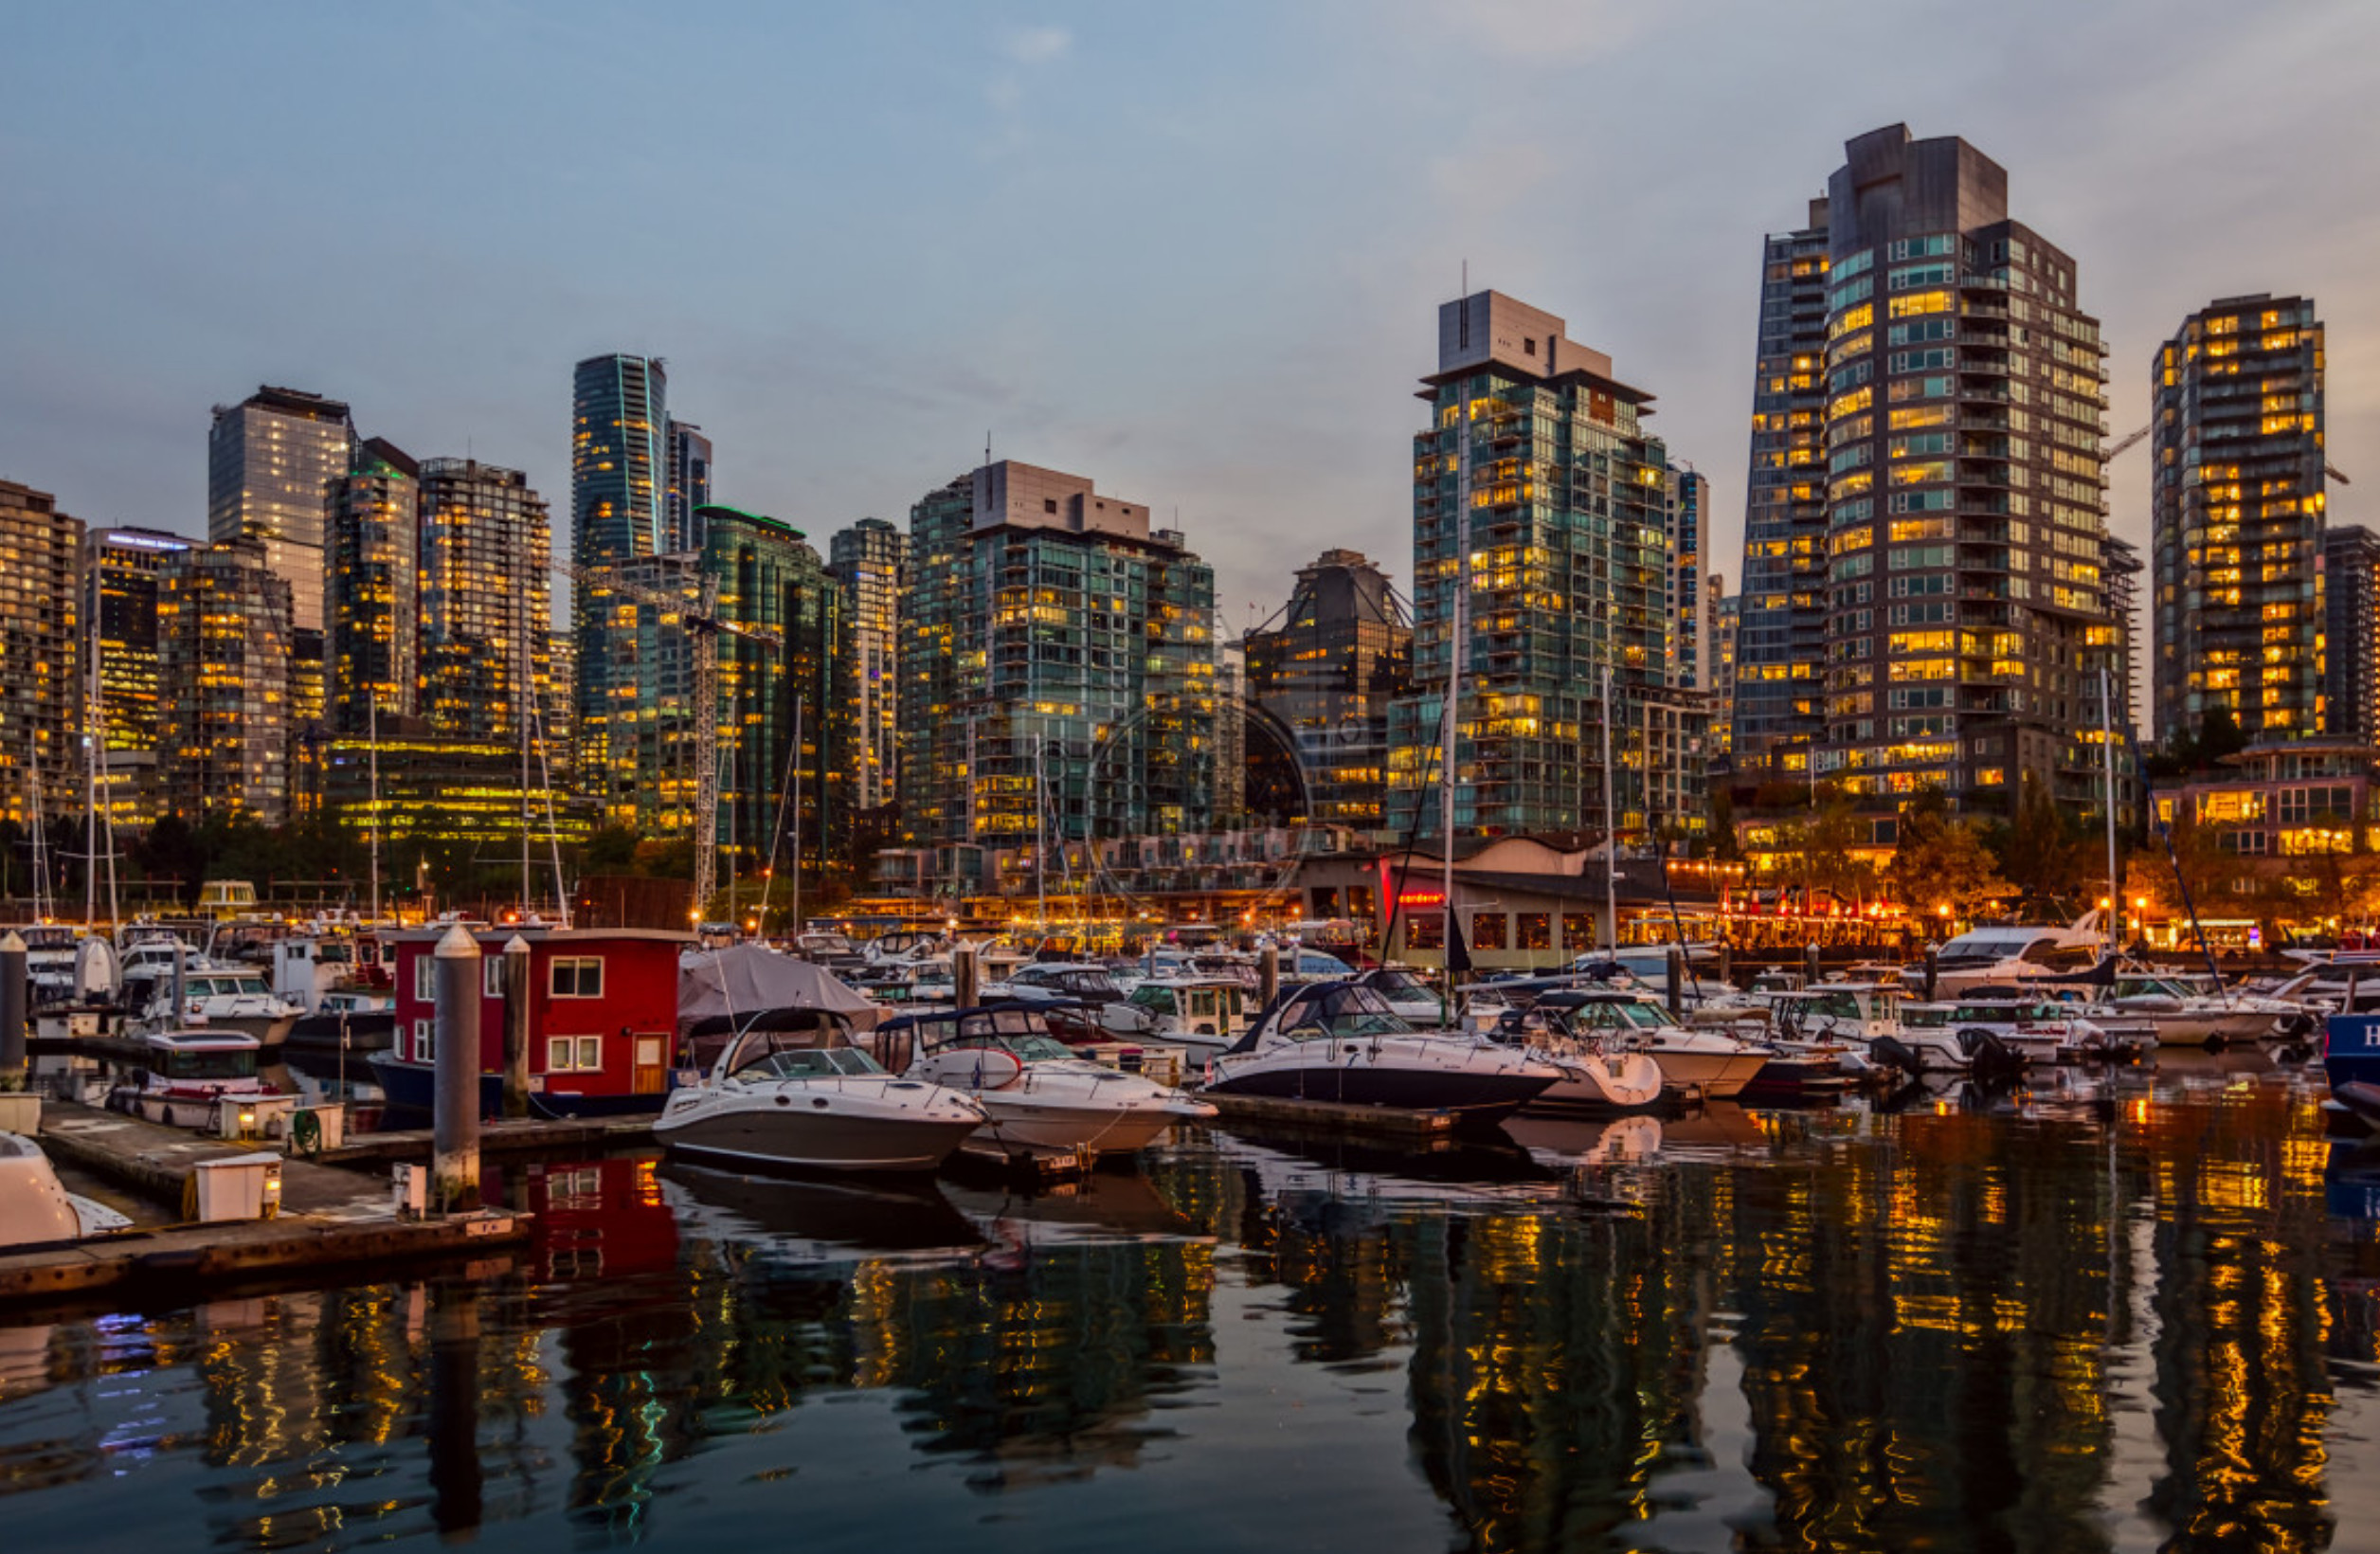 The Vancouver harbor area was a really diverse and interesting place to observe at different times of the day.